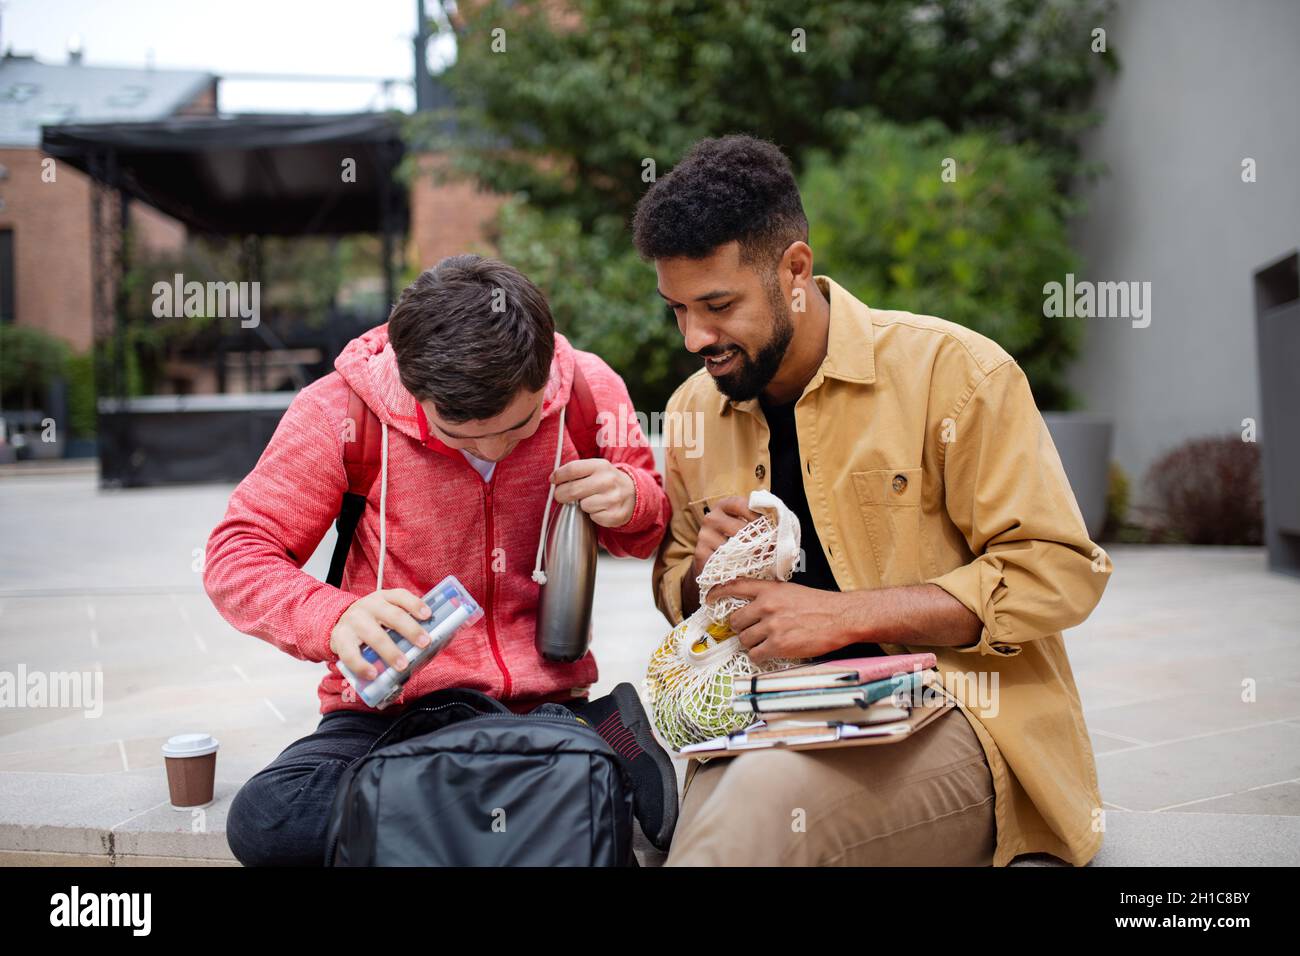 Young man student with Down syndrome and his mentoring friend sitting outdoors in campus area Stock Photo